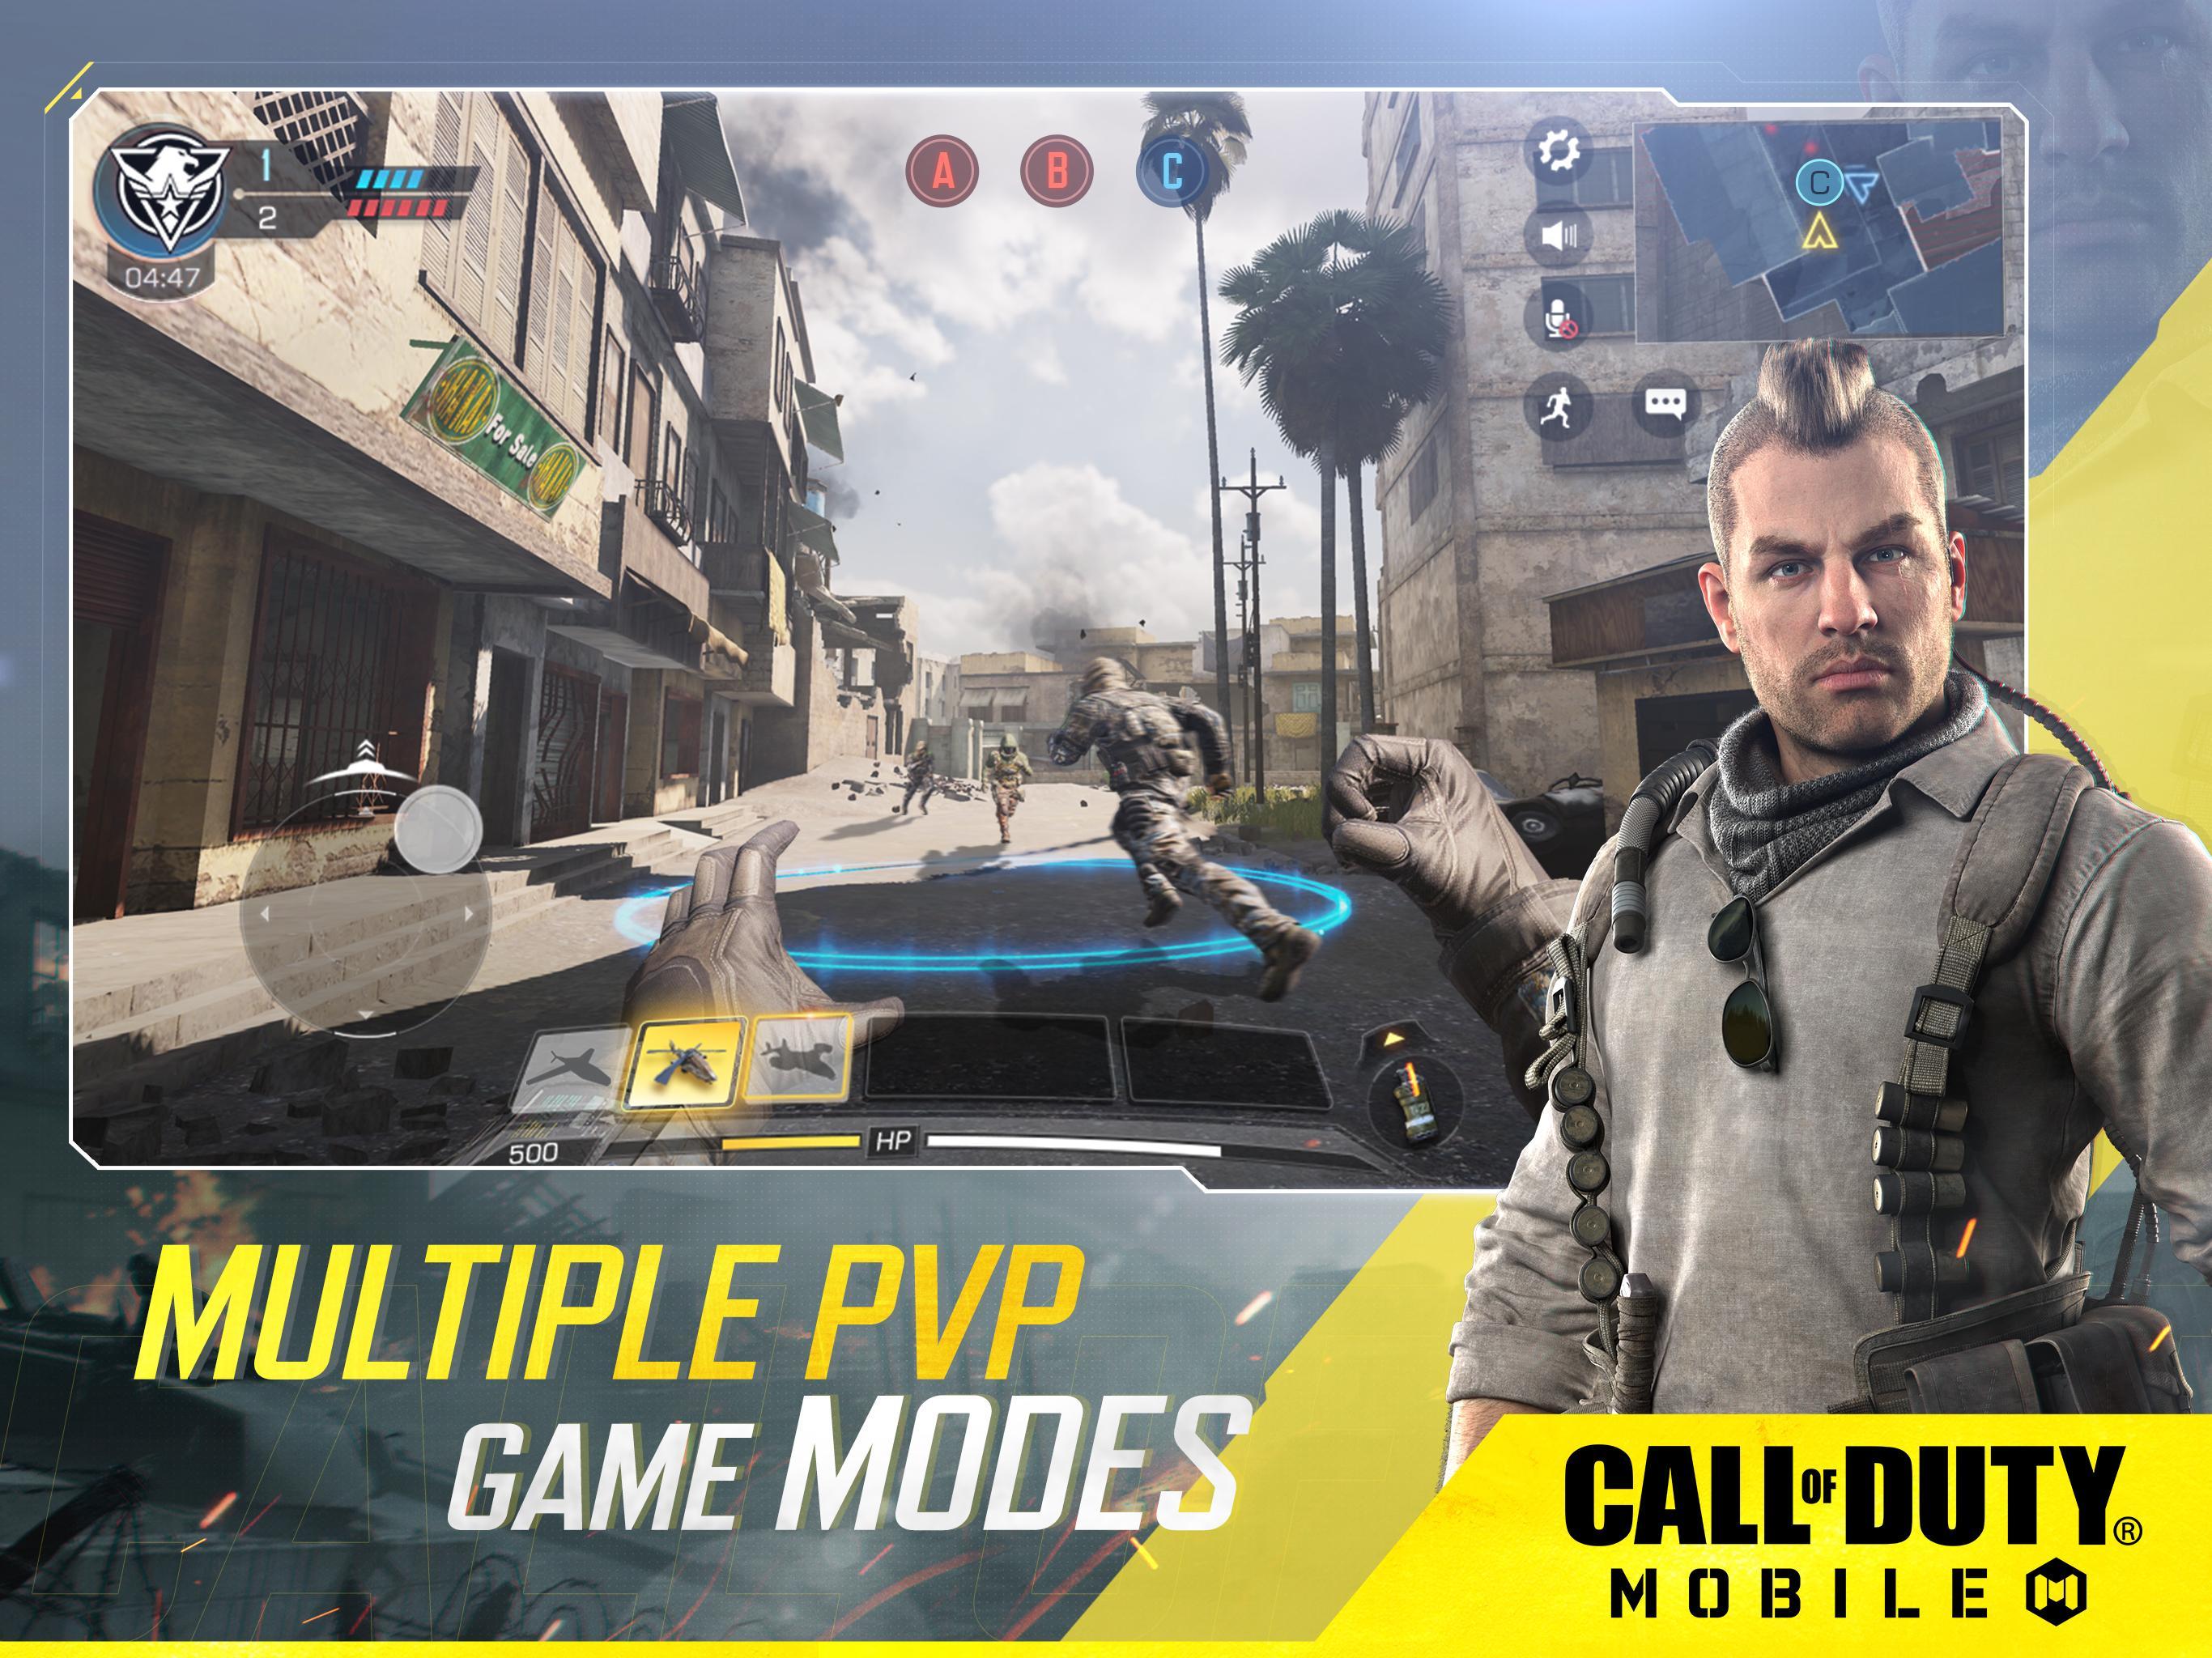 How To Run Call Of Duty Mobile Lite In Pc Codadd.Com - Call ... - 